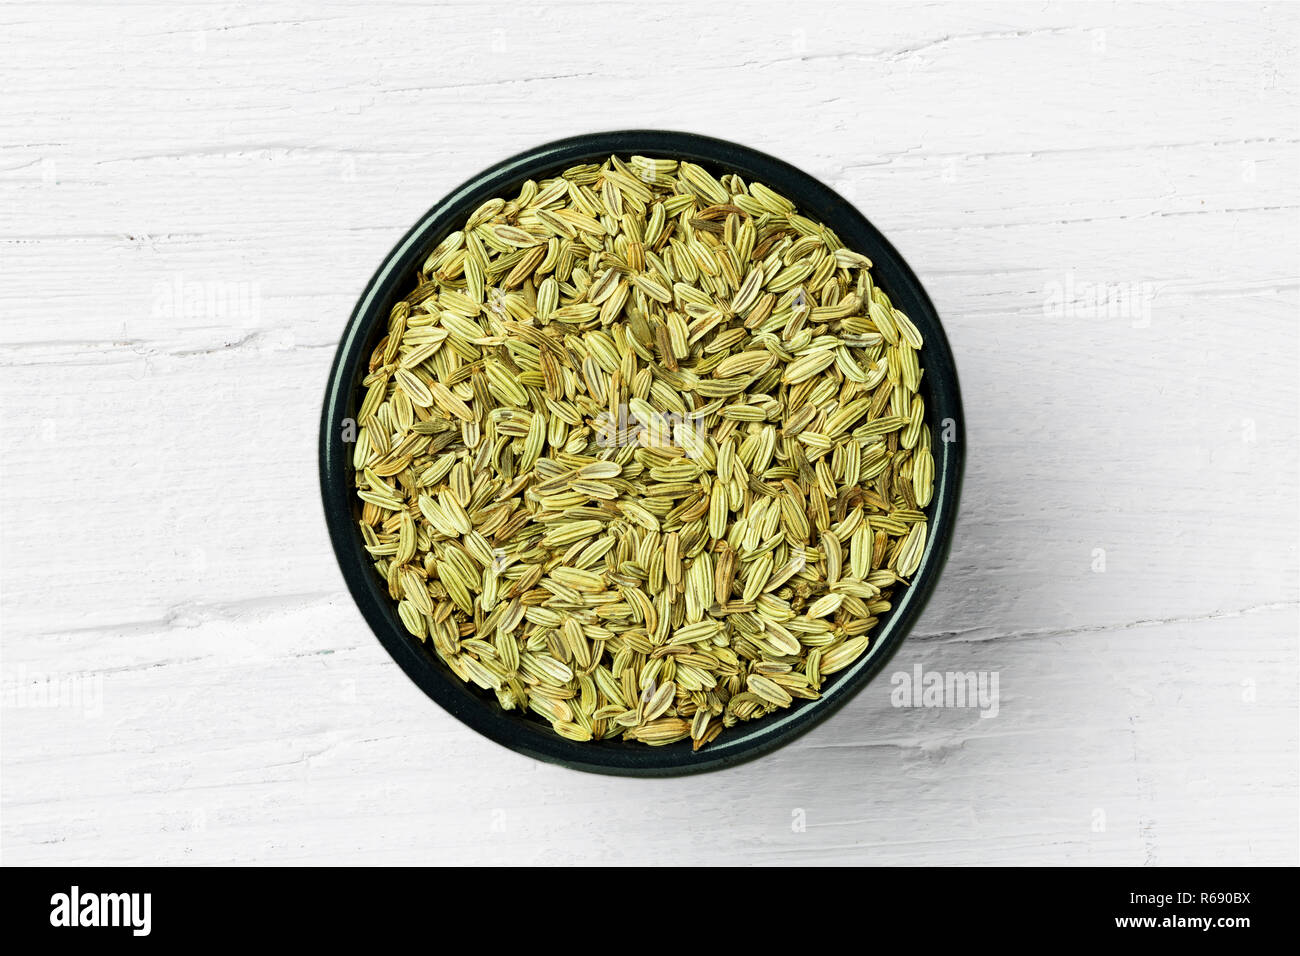 Round cup with fennel seed on white wooden background, view directly from above. Stock Photo